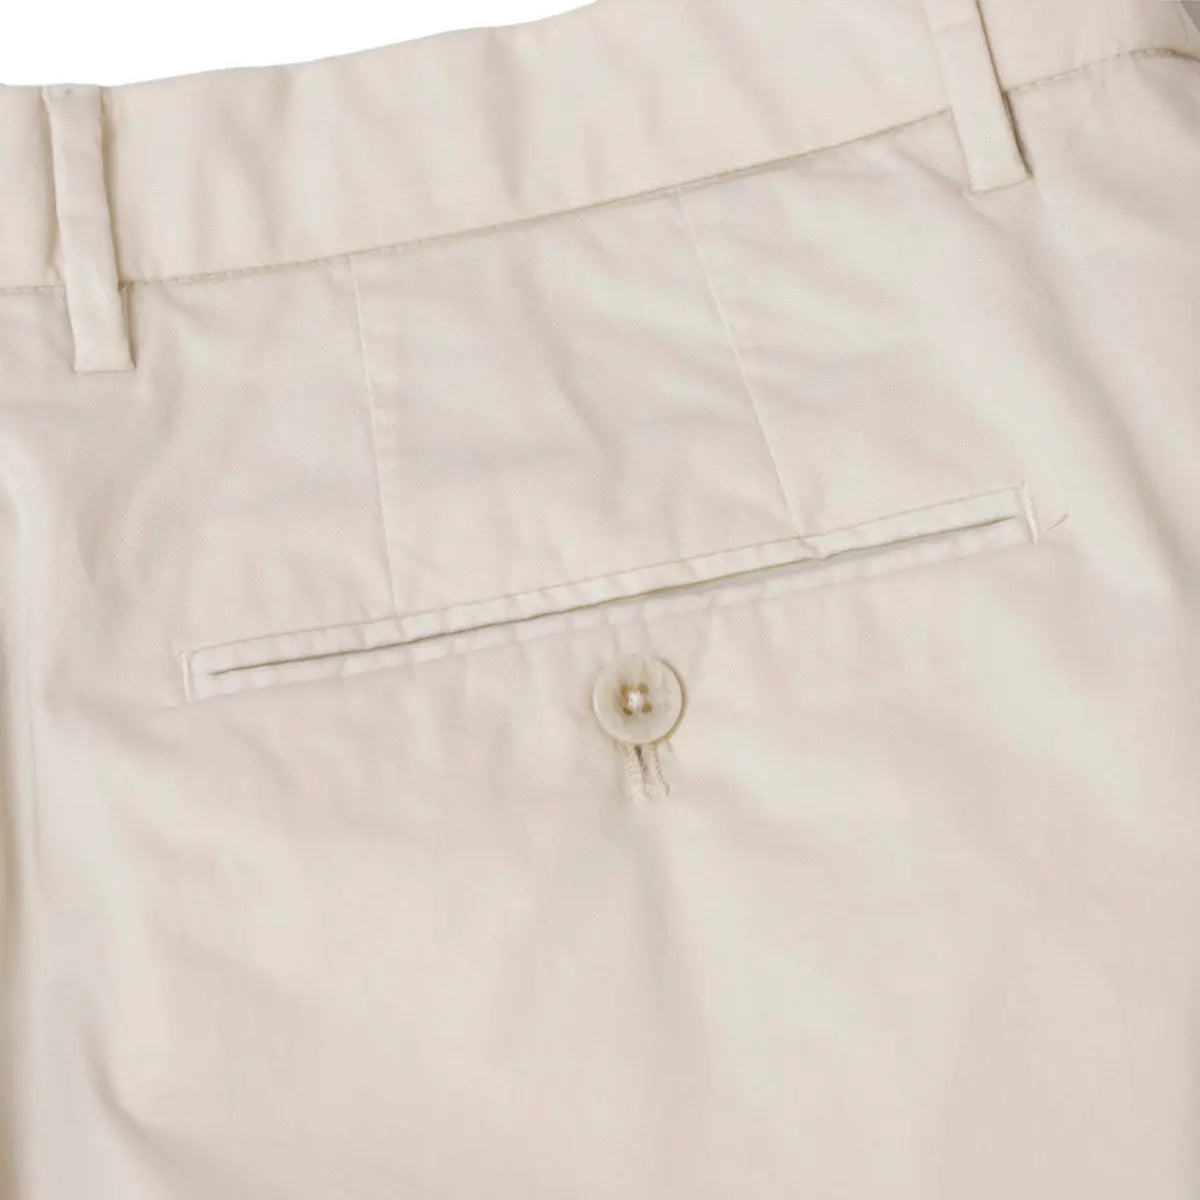 Cream Cotton Stretch Fit Chino Shorts  Robert Old   